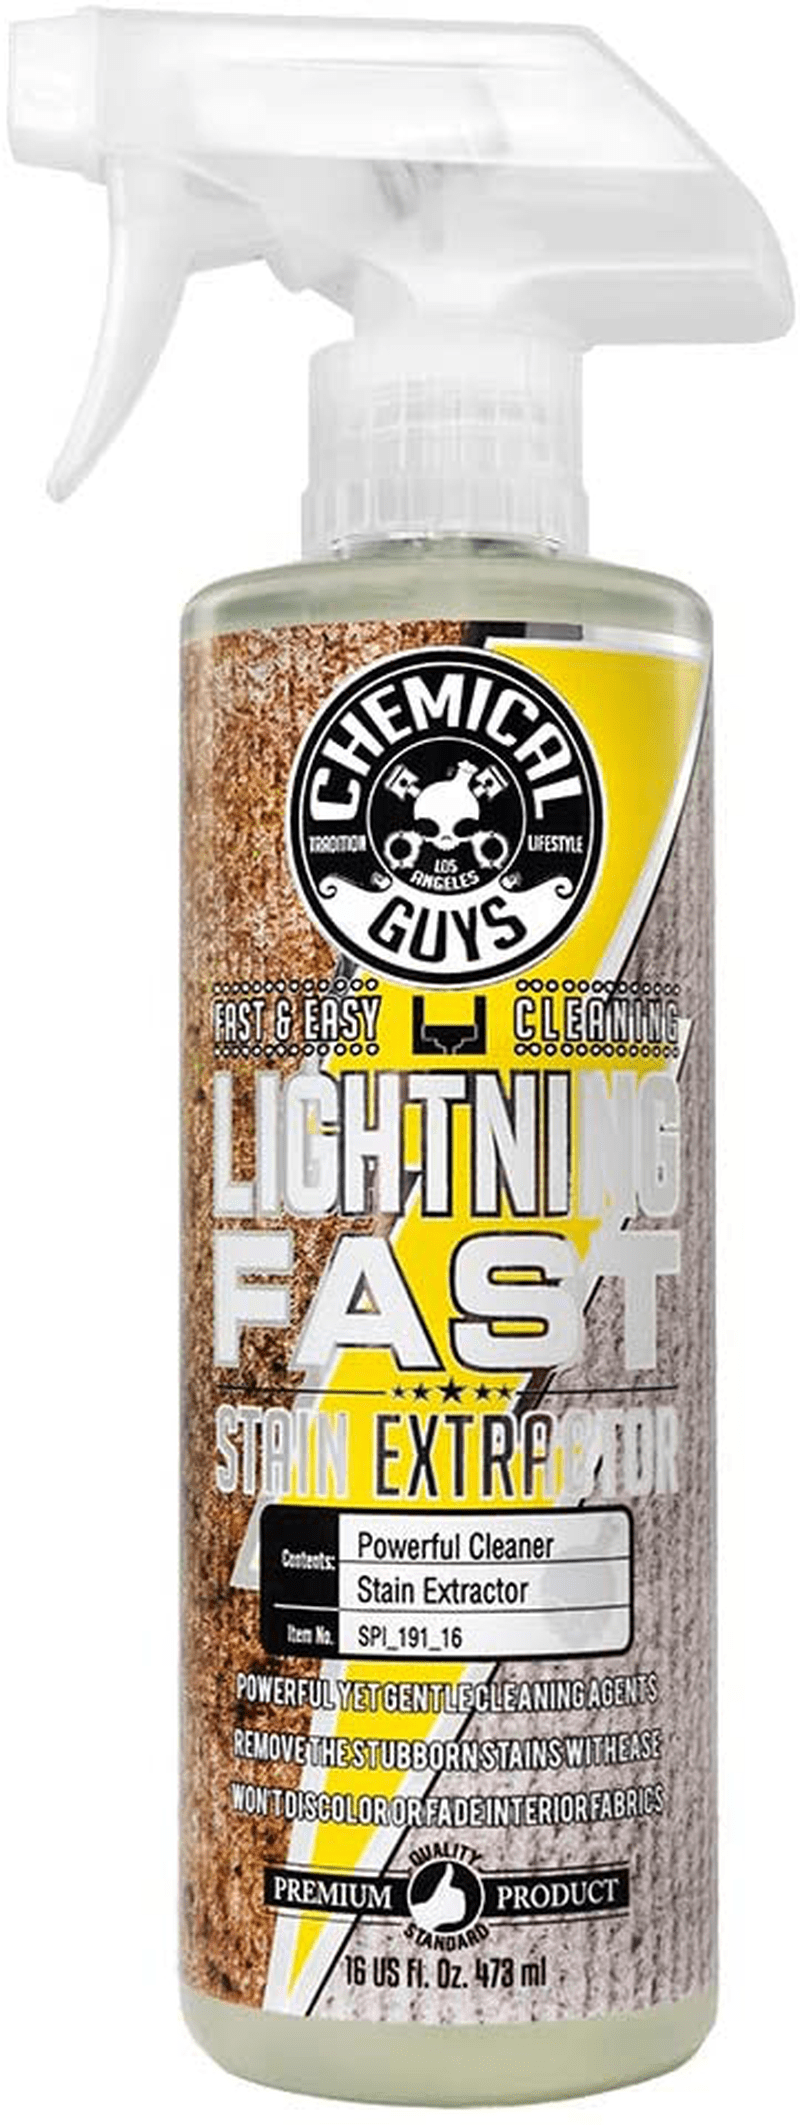 Chemical Guys Lightning Stain Extractor 16oz, Carpet & Upholstery  CleanerChemical Guys Lightning Stain Extractor 16oz, Carpet & Upholstery  CleanerChemical Guys Lightning Stain Extractor 16oz